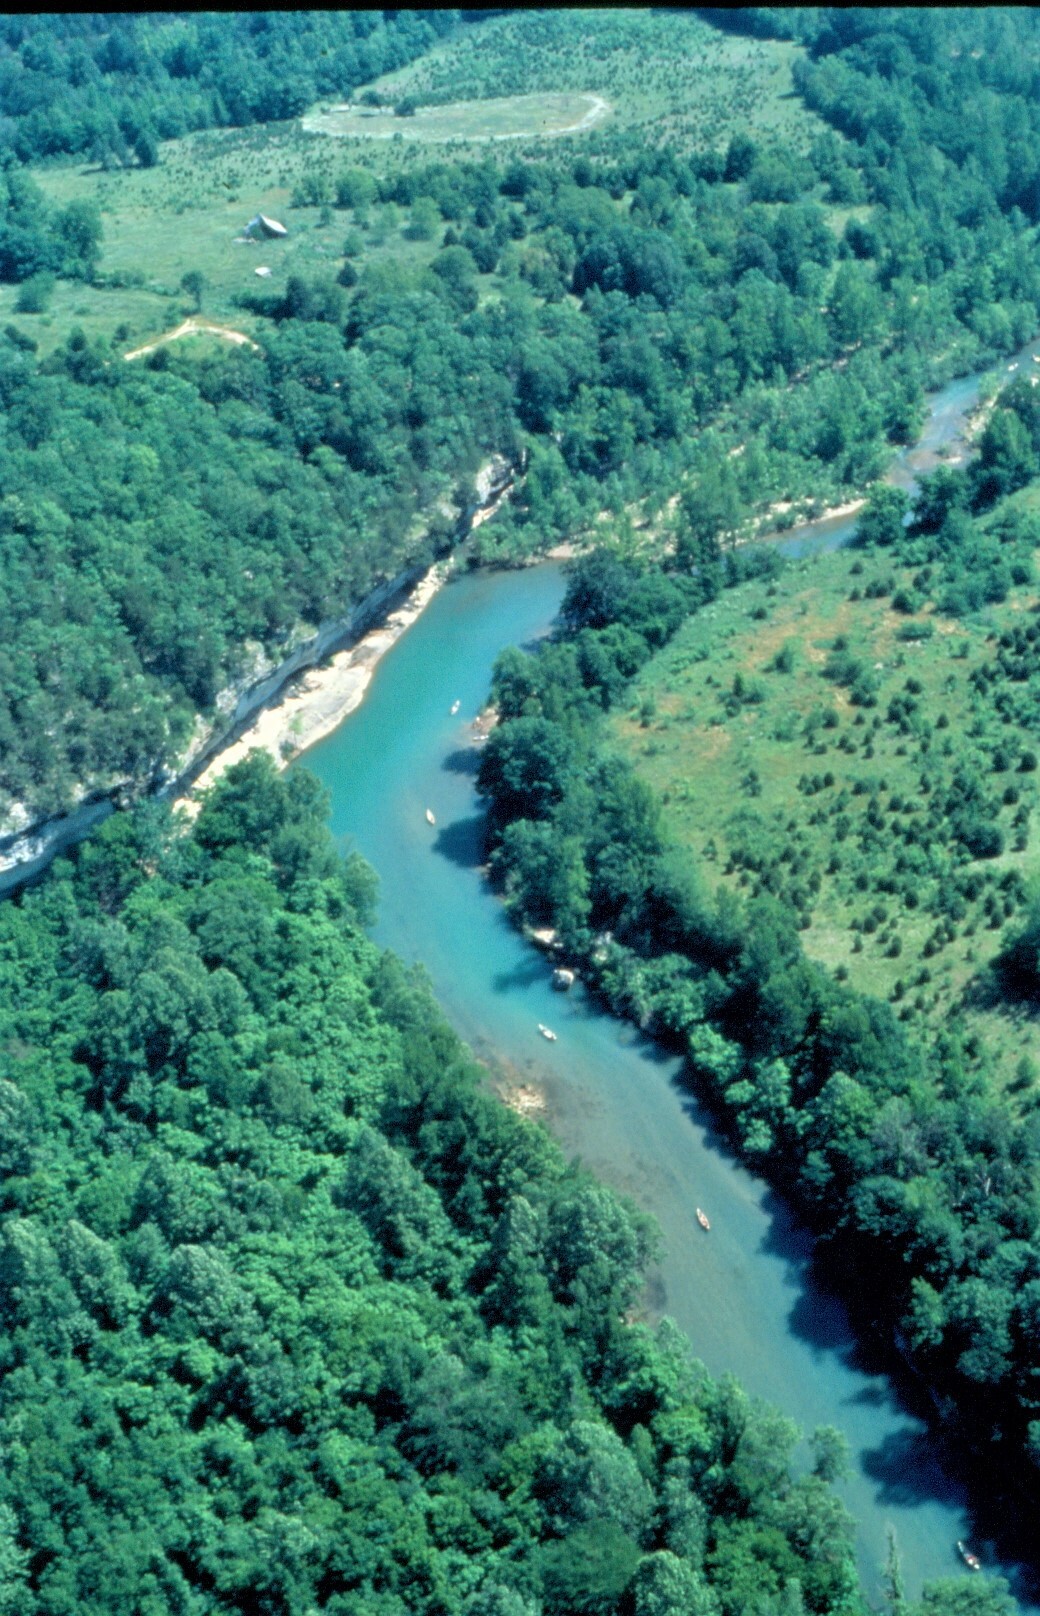 Green trees with blue river curving from top right through center to bottom right.